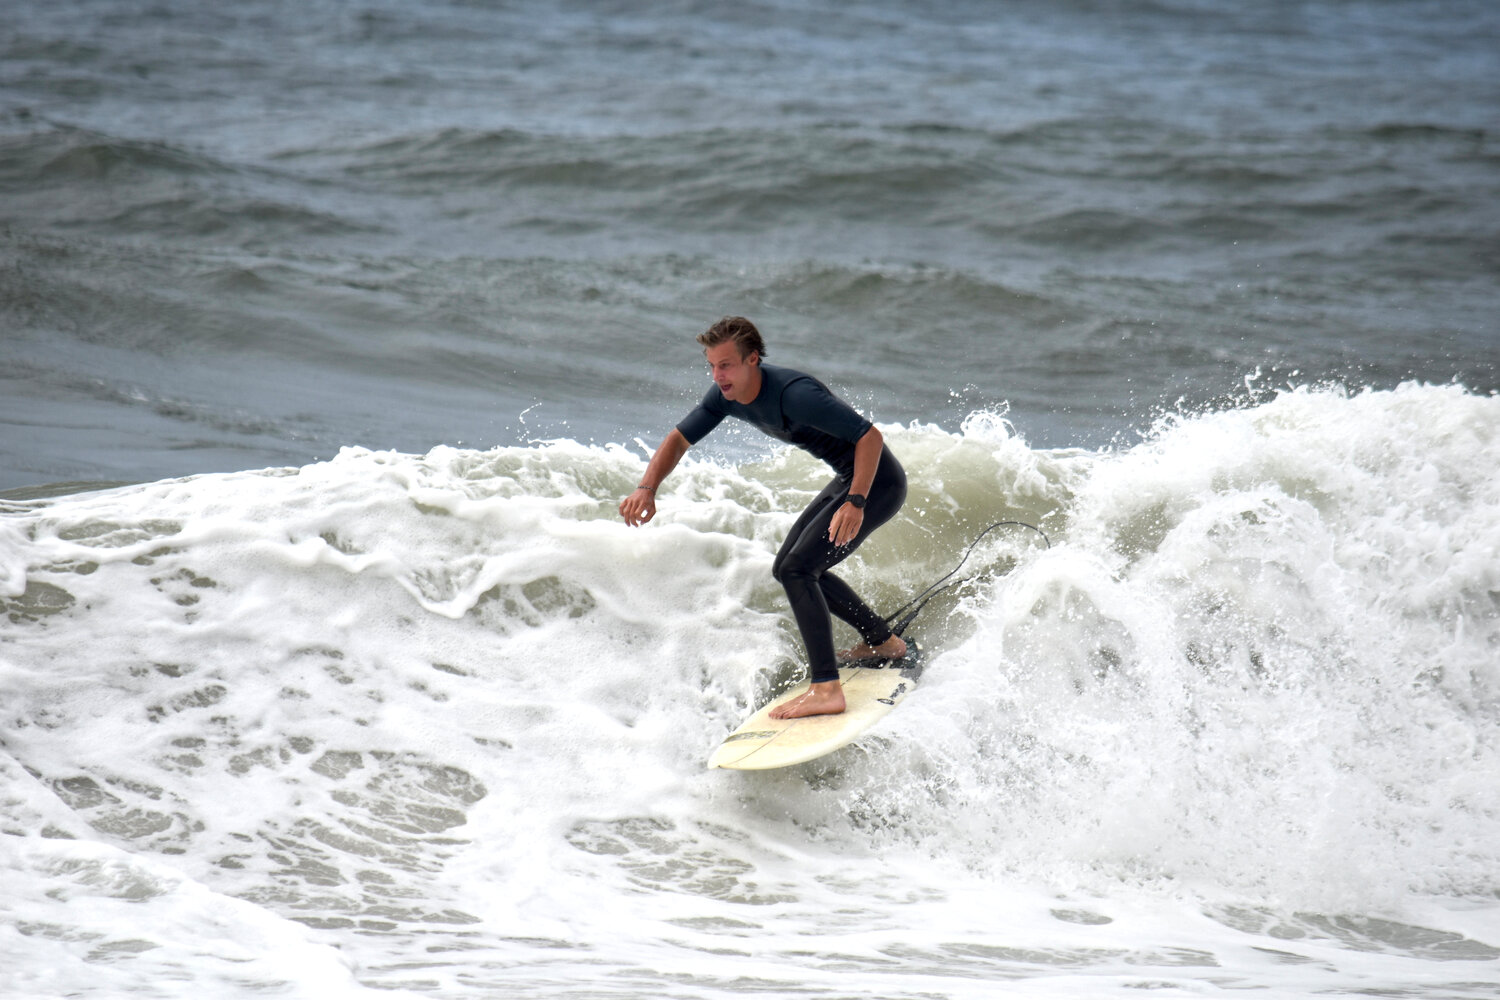 Surfers at Nobadeer Beach enjoyed large waves Monday, with heavy swells reported across the south shore.